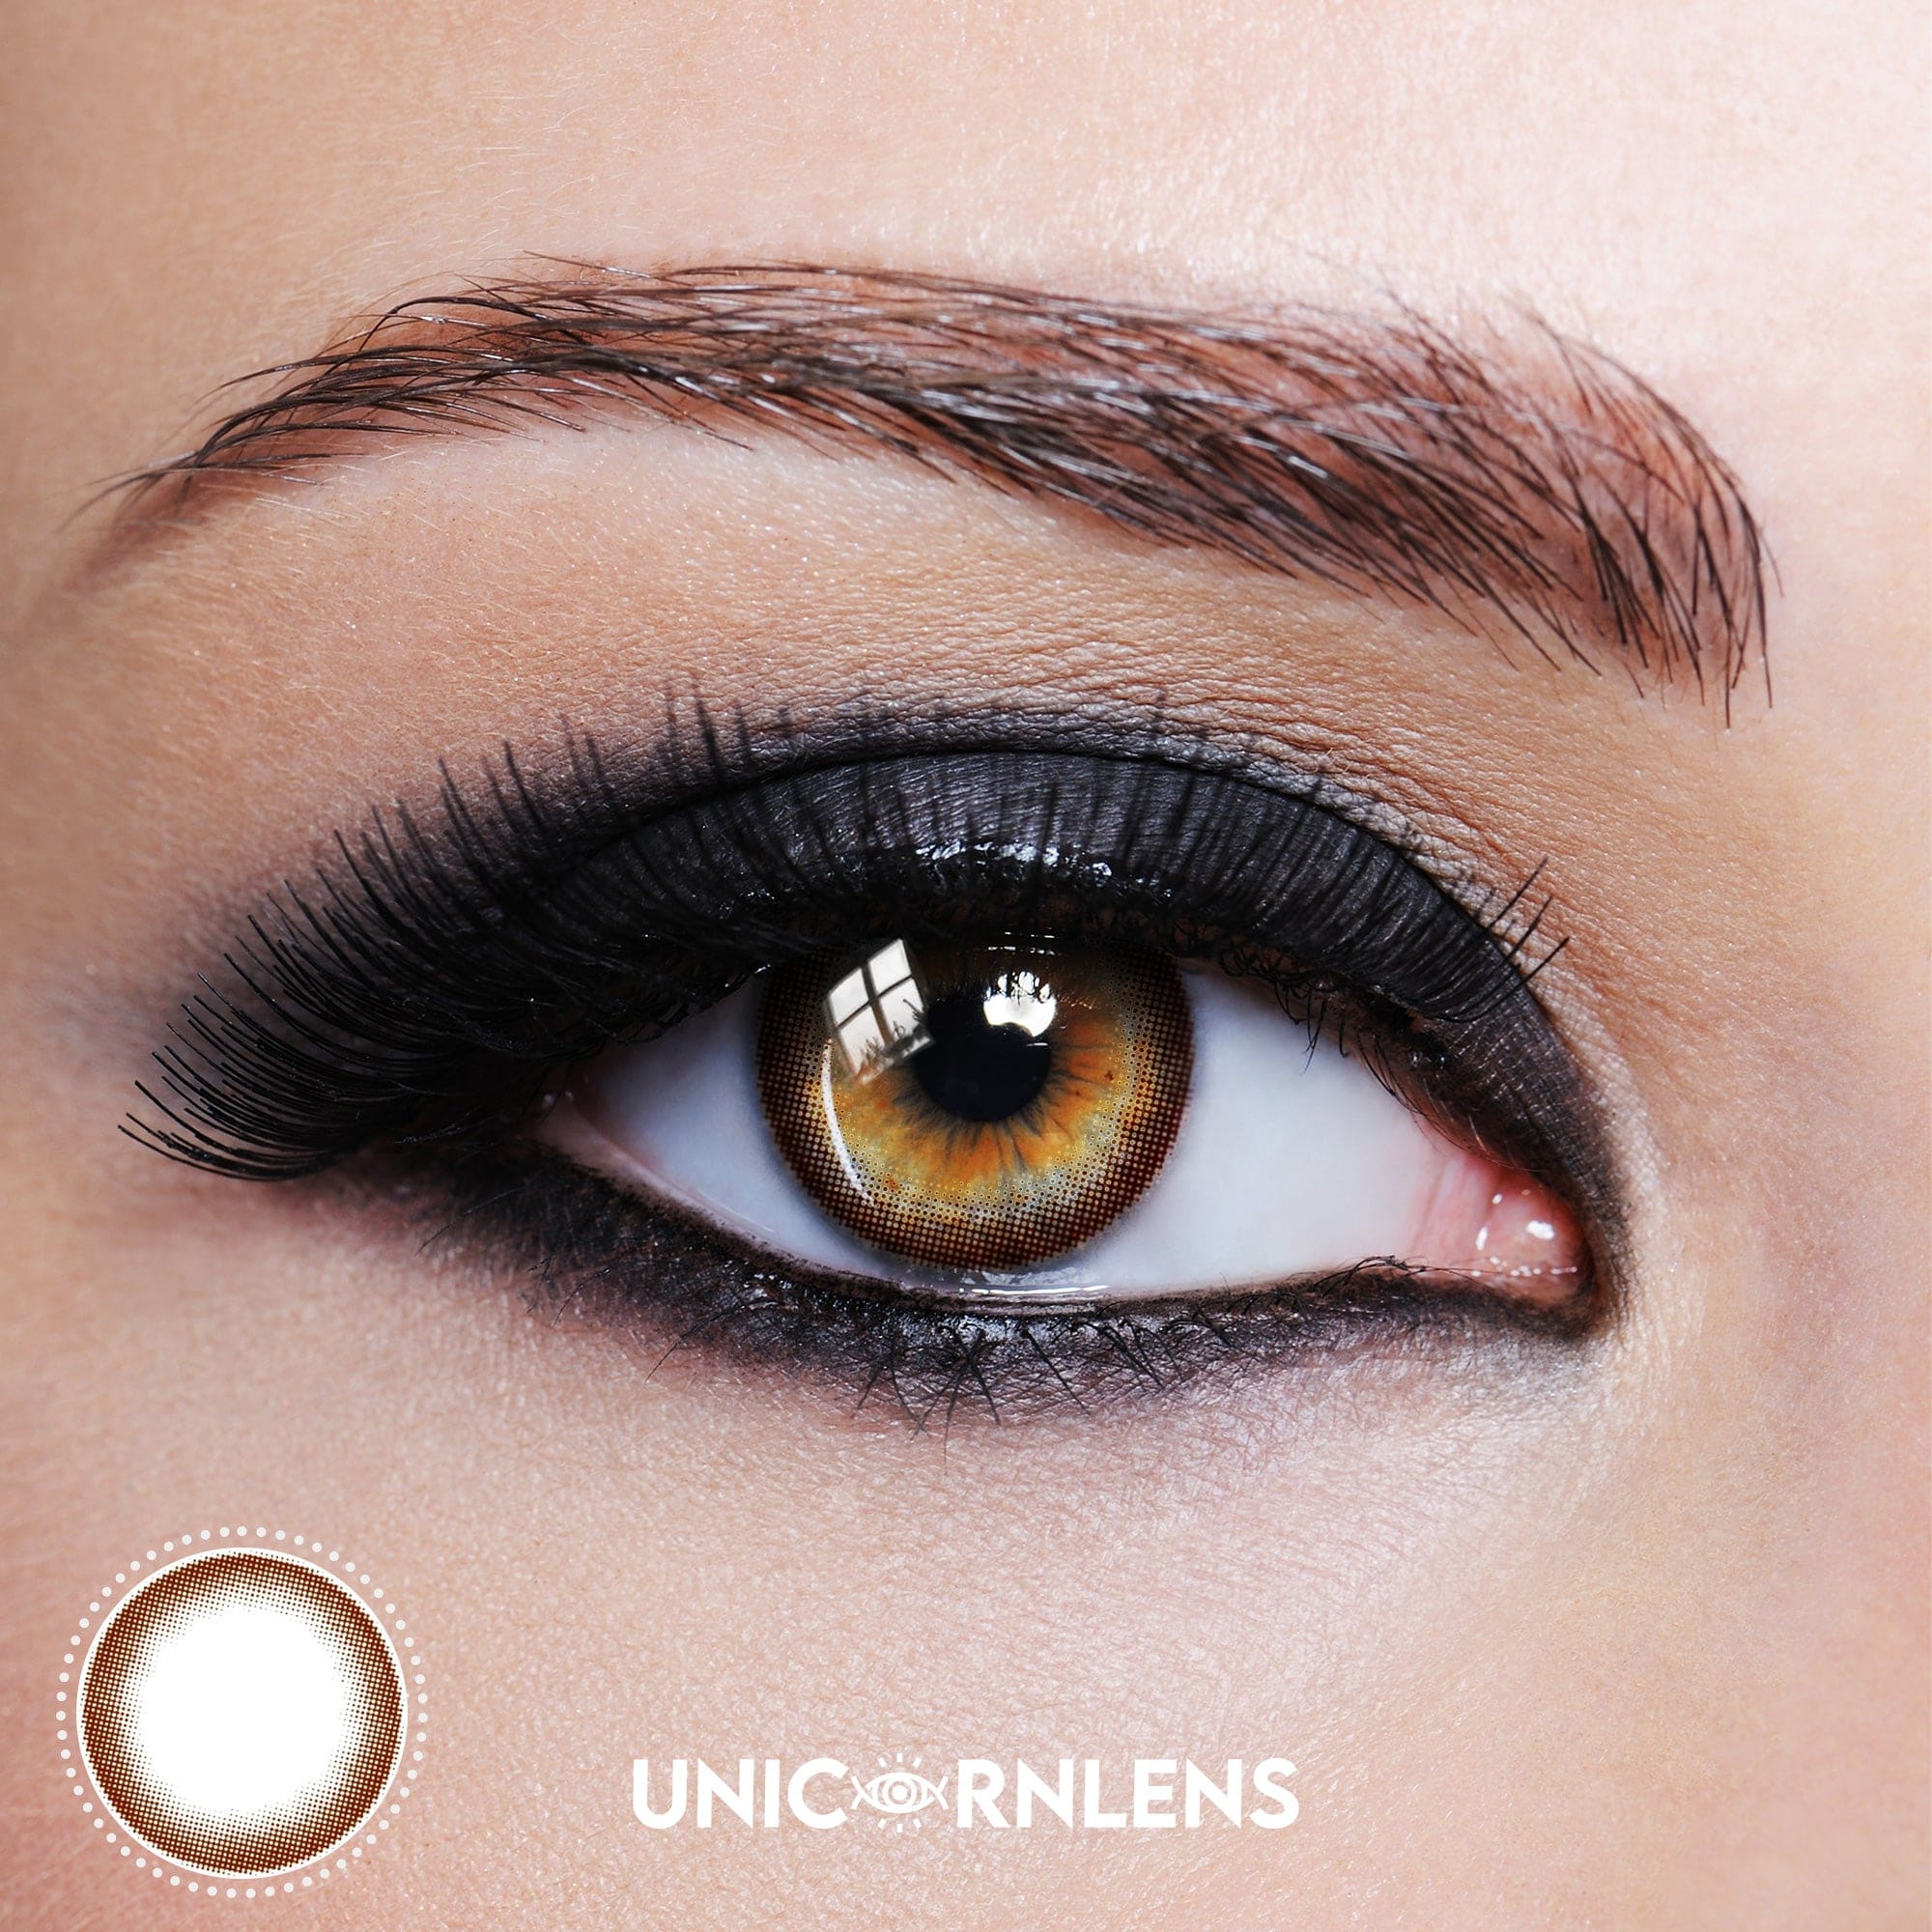 Unicornlens Brown Ring Colored Contact Lenses - Unicornlens